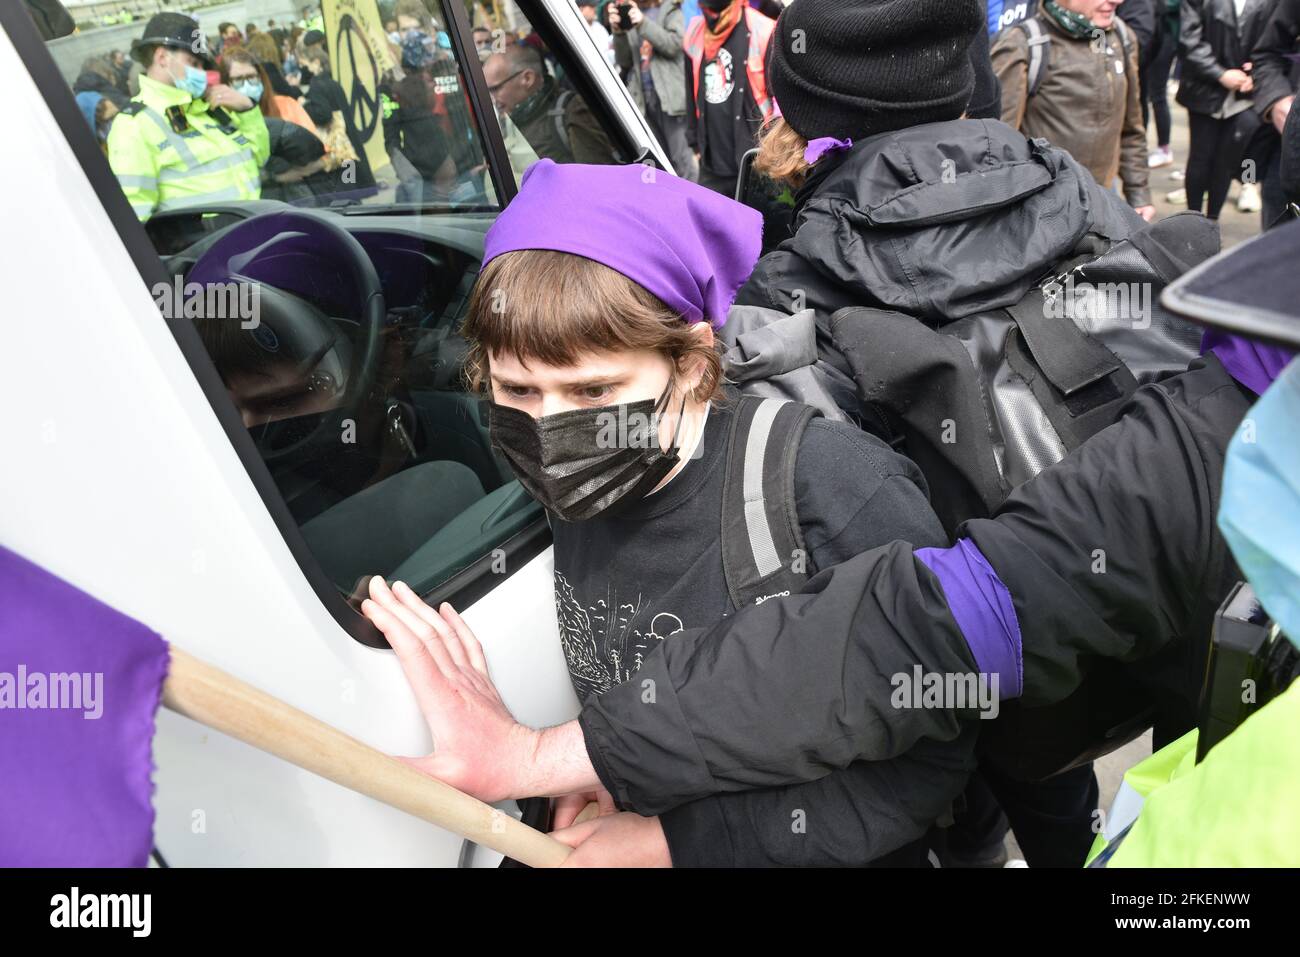 Trafalgar Square, London, UK. 1st May 2021. Kill the Bill protesters in Trafalgar Square.  Police try to stop a van with a sound system from entering the square. Credit: Matthew Chattle/Alamy Live News Stock Photo